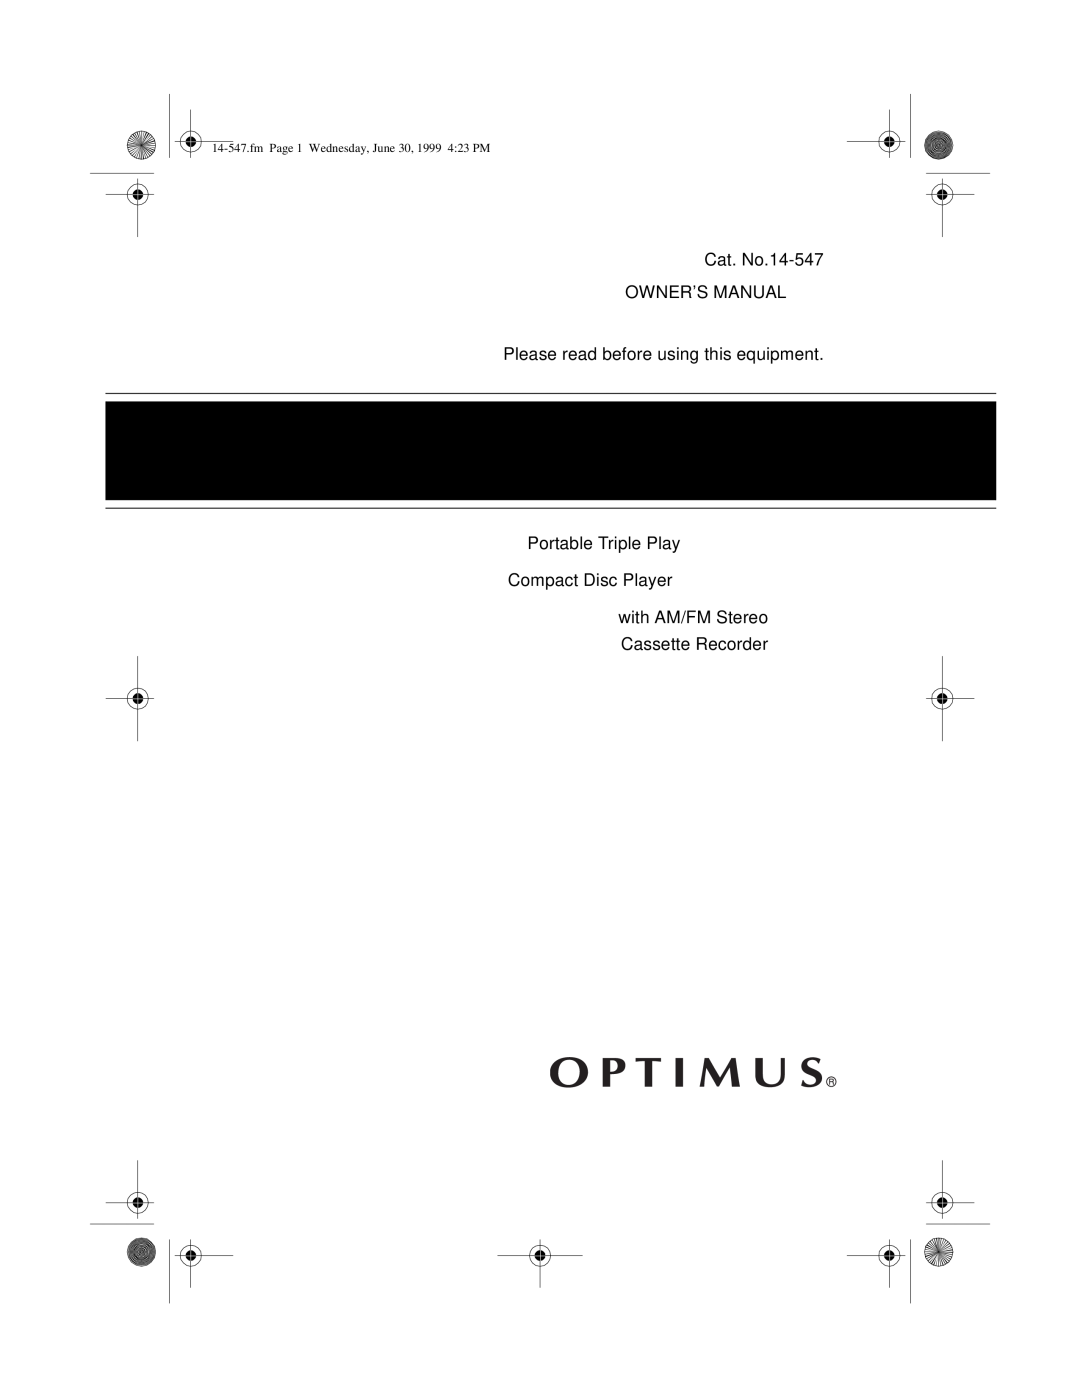 Optimus owner manual Please read before using this equipment CD-3322, Portable Triple Play Compact Disc Player 